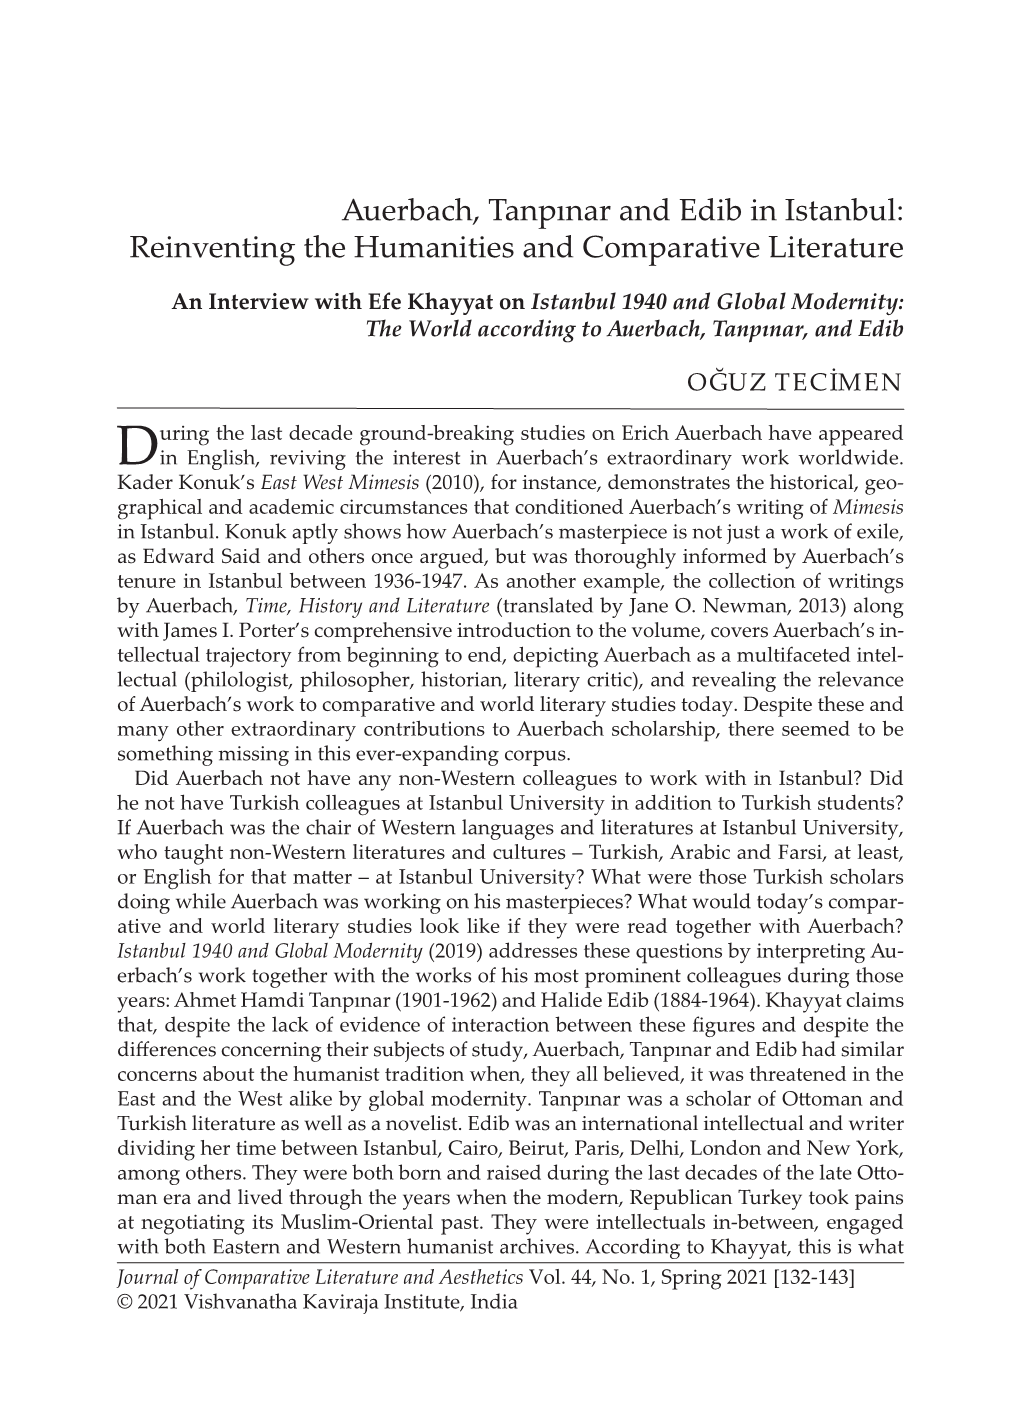 Auerbach, Tanpınar and Edib in Istanbul: Reinventing the Humanities and Comparative Literature